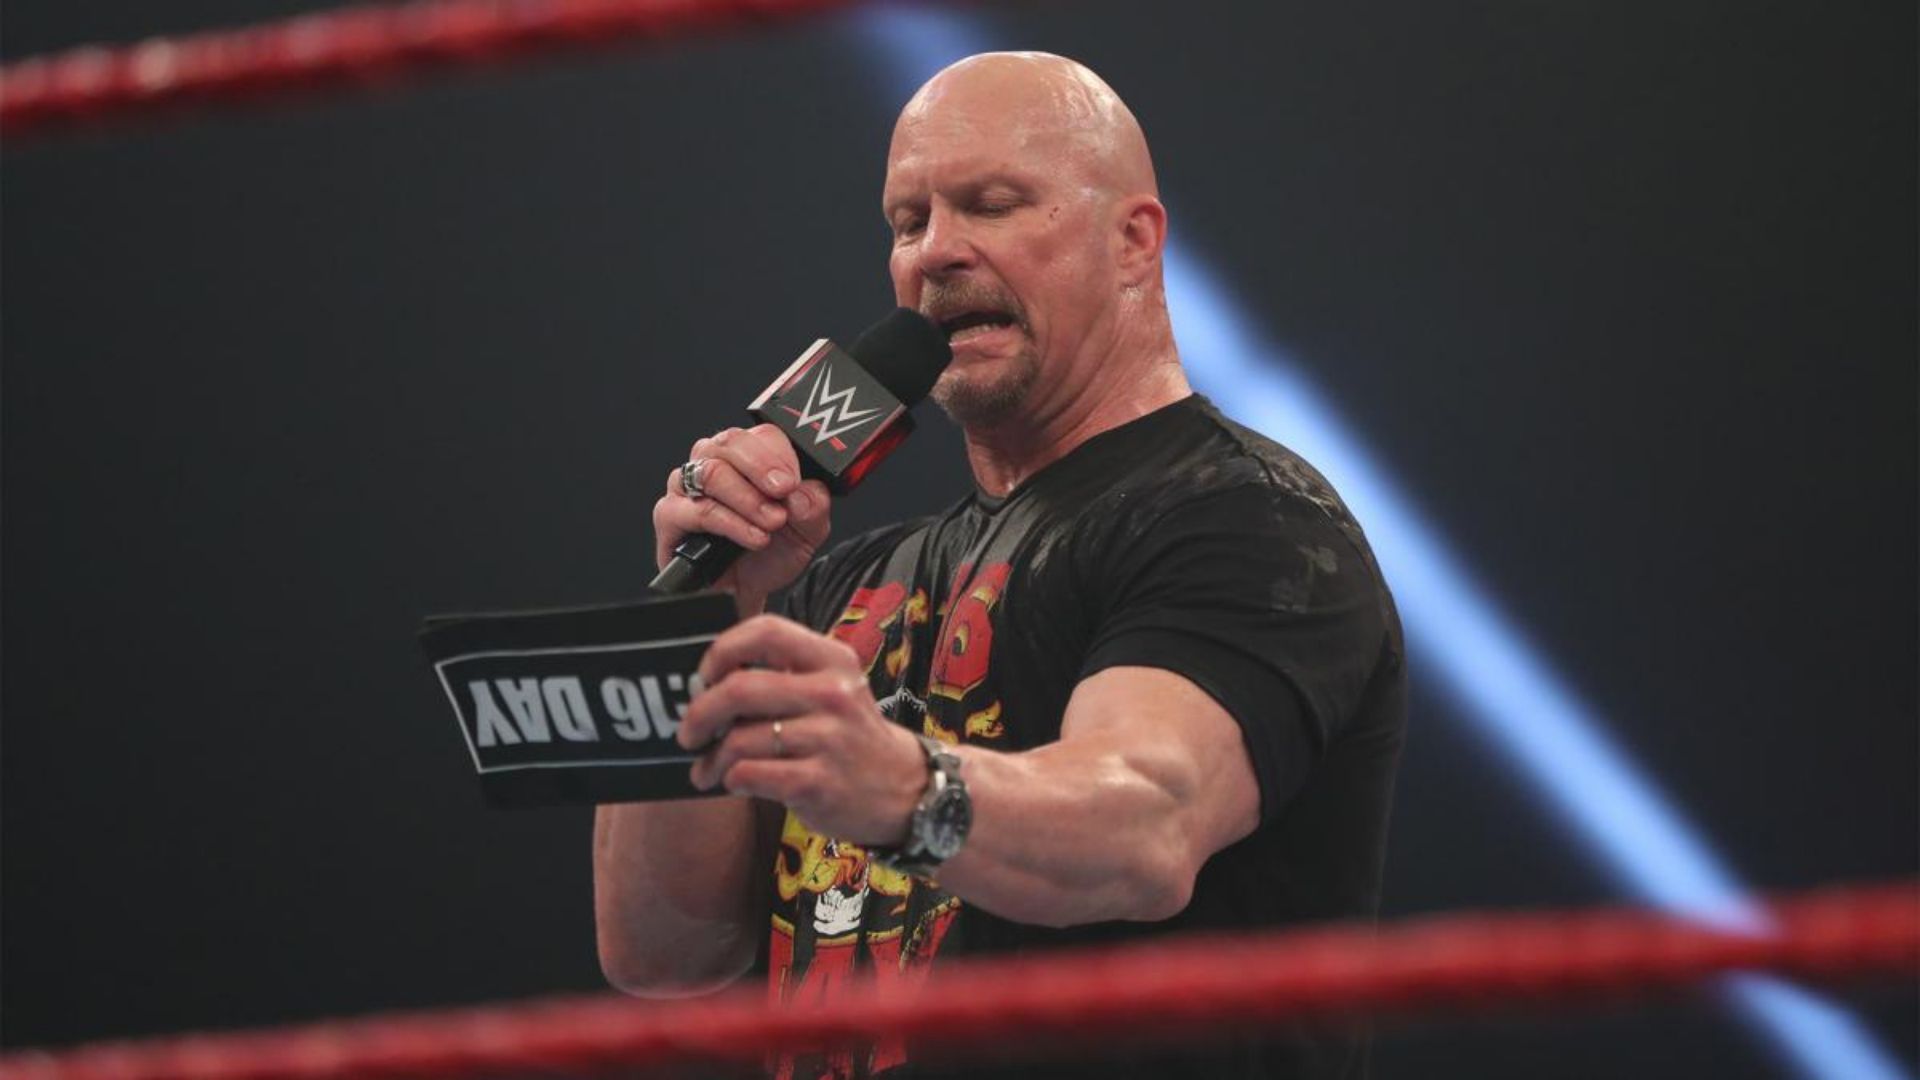 Steve Austin has been friends with Jim Ross for over 25 years